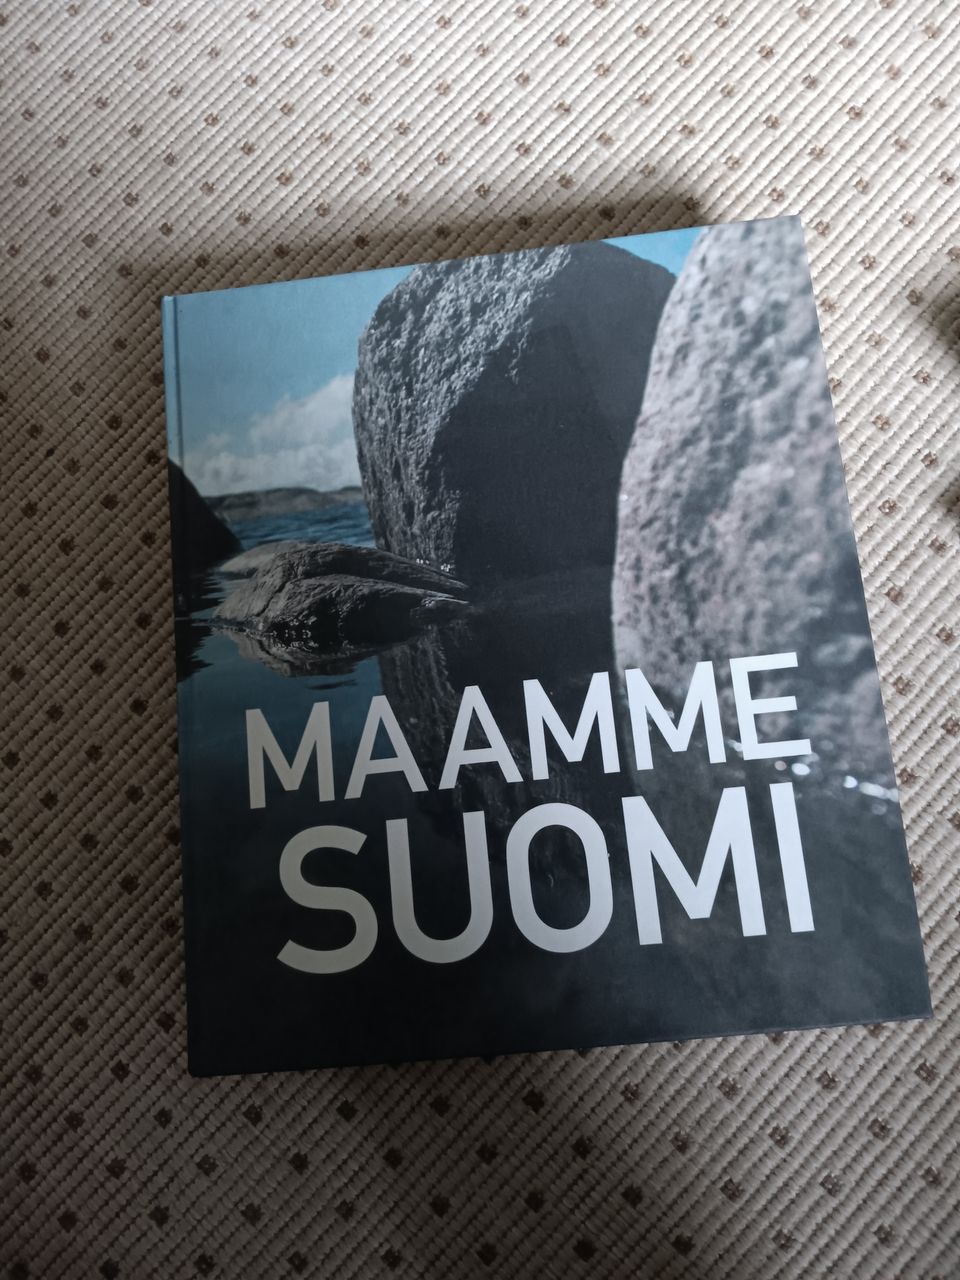 Maamme suomi